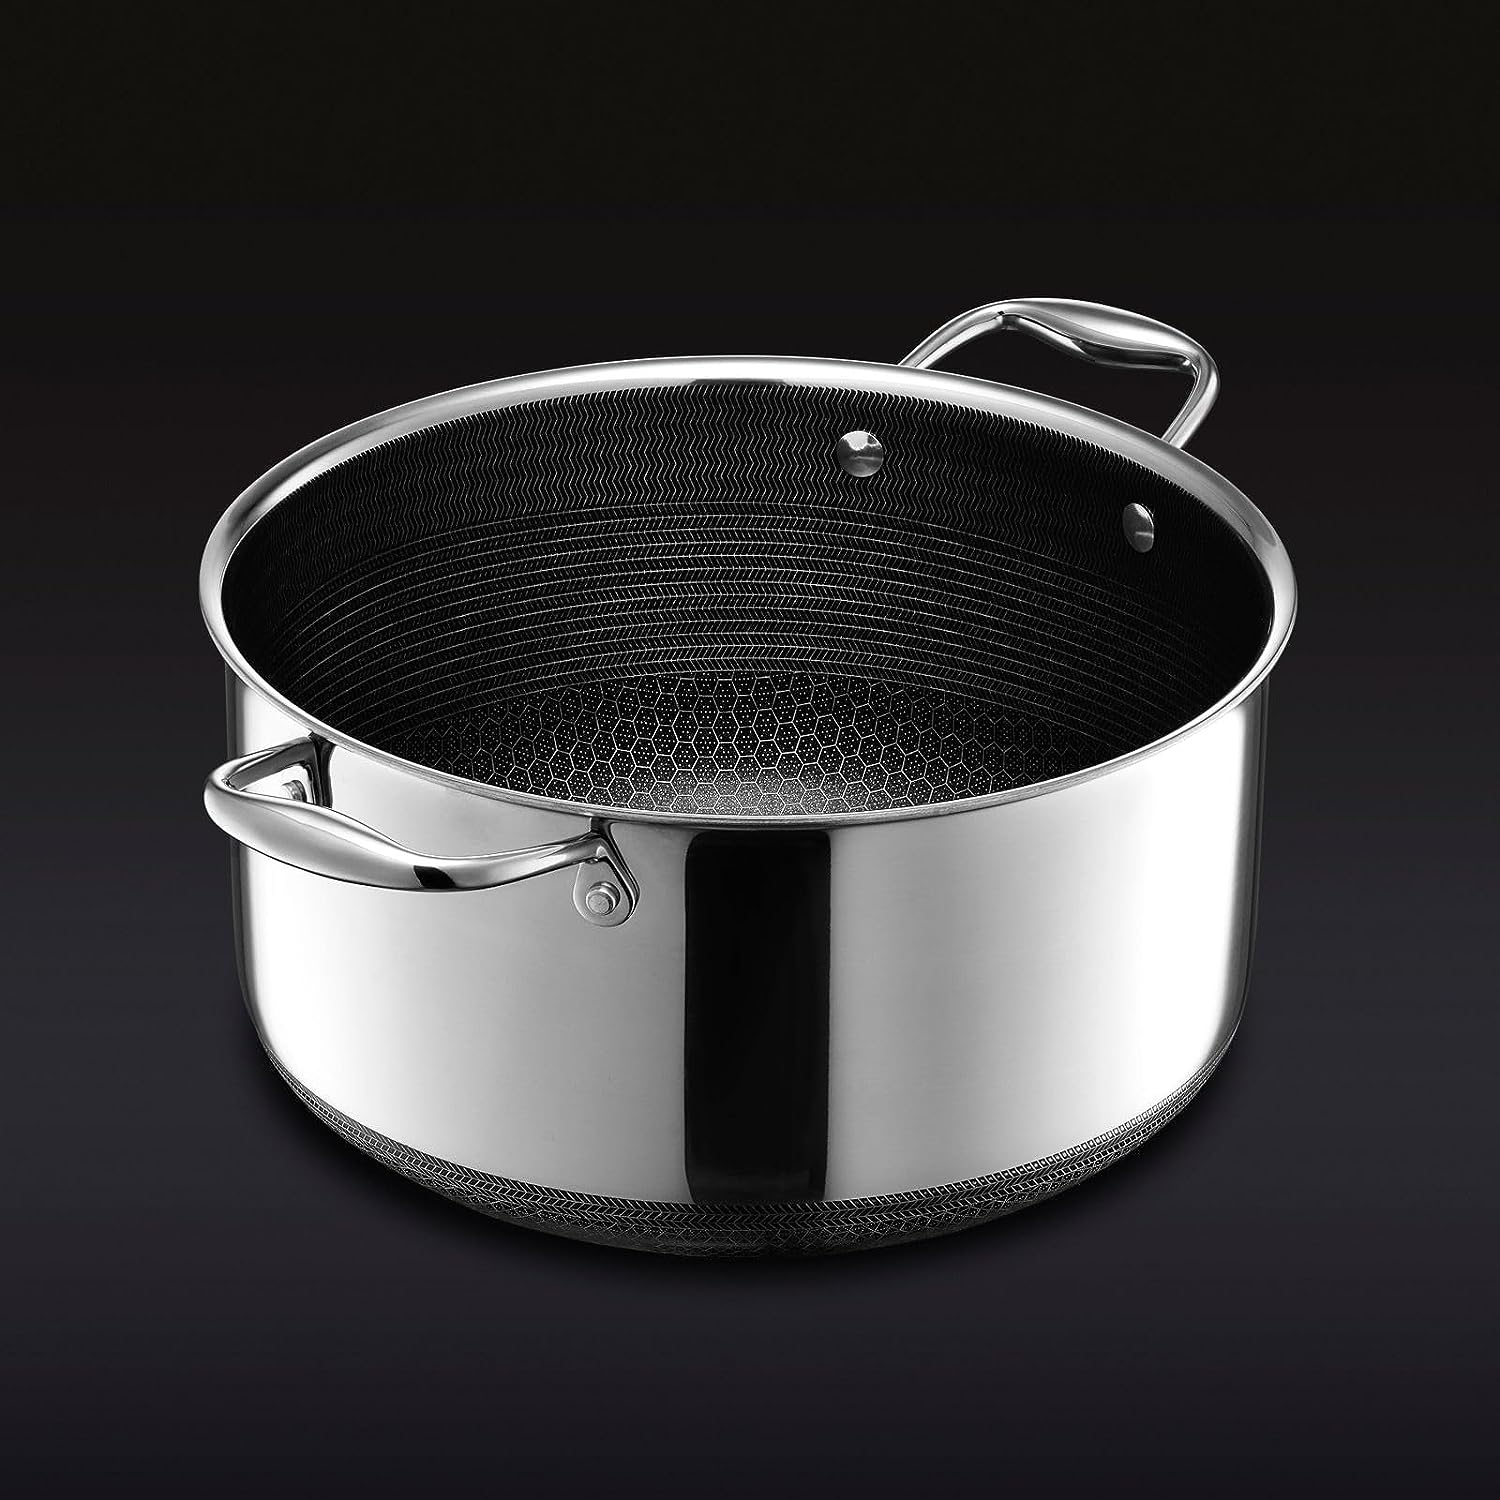 https://bigbigmart.com/wp-content/uploads/2023/12/HexClad-Hybrid-Nonstick-8-Quart-Stockpot-with-Tempered-Glass-Lid-Dishwasher-Safe-Induction-Ready-Compatible-with-All-Cooktops1q.jpg